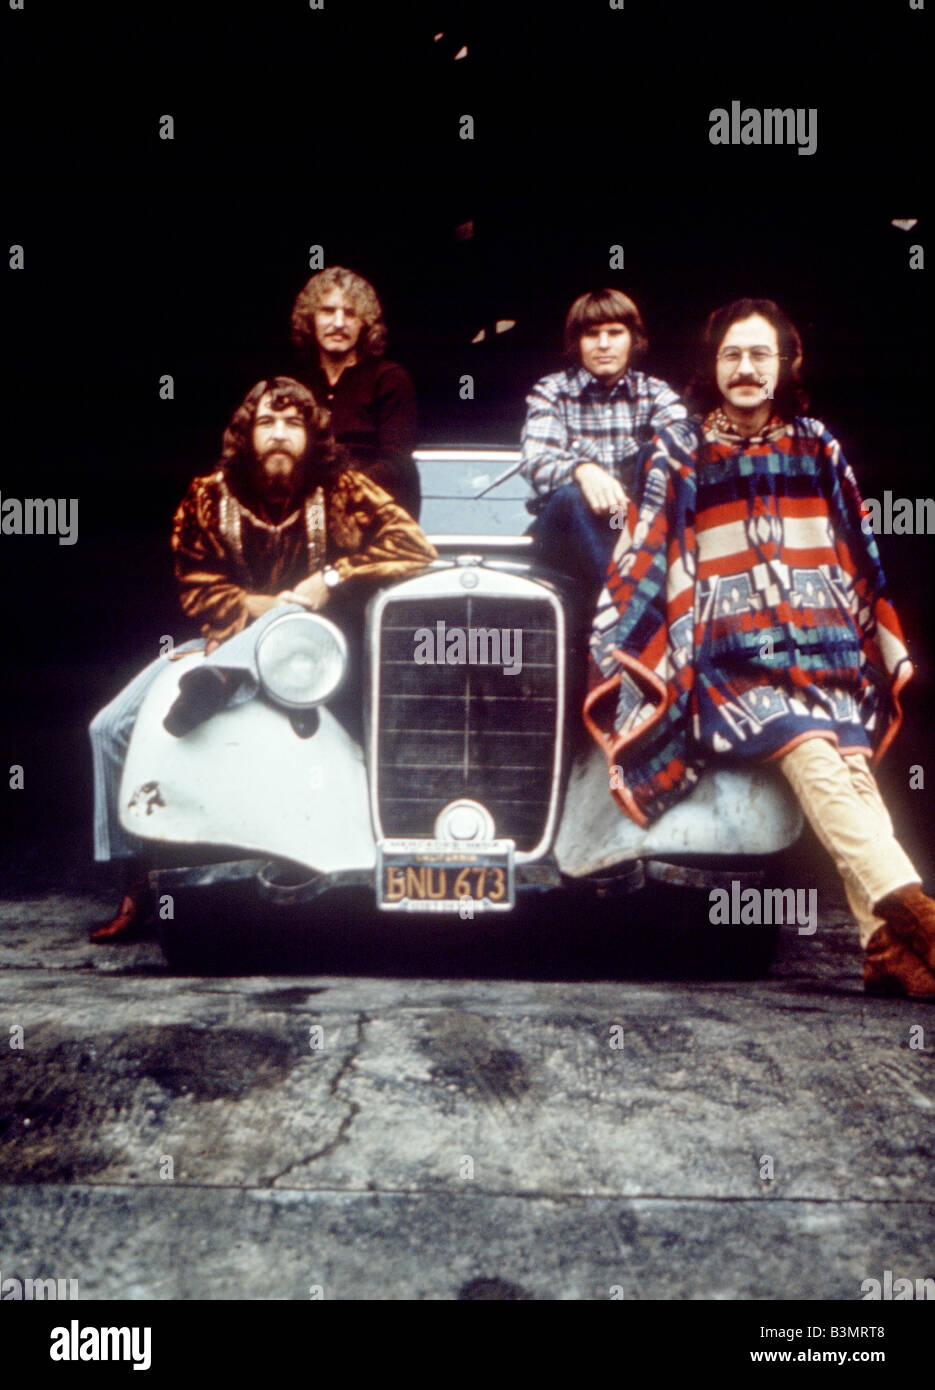 CREEDENCE CLEARWATER REVIVAL  US pop group about 1971 Stock Photo